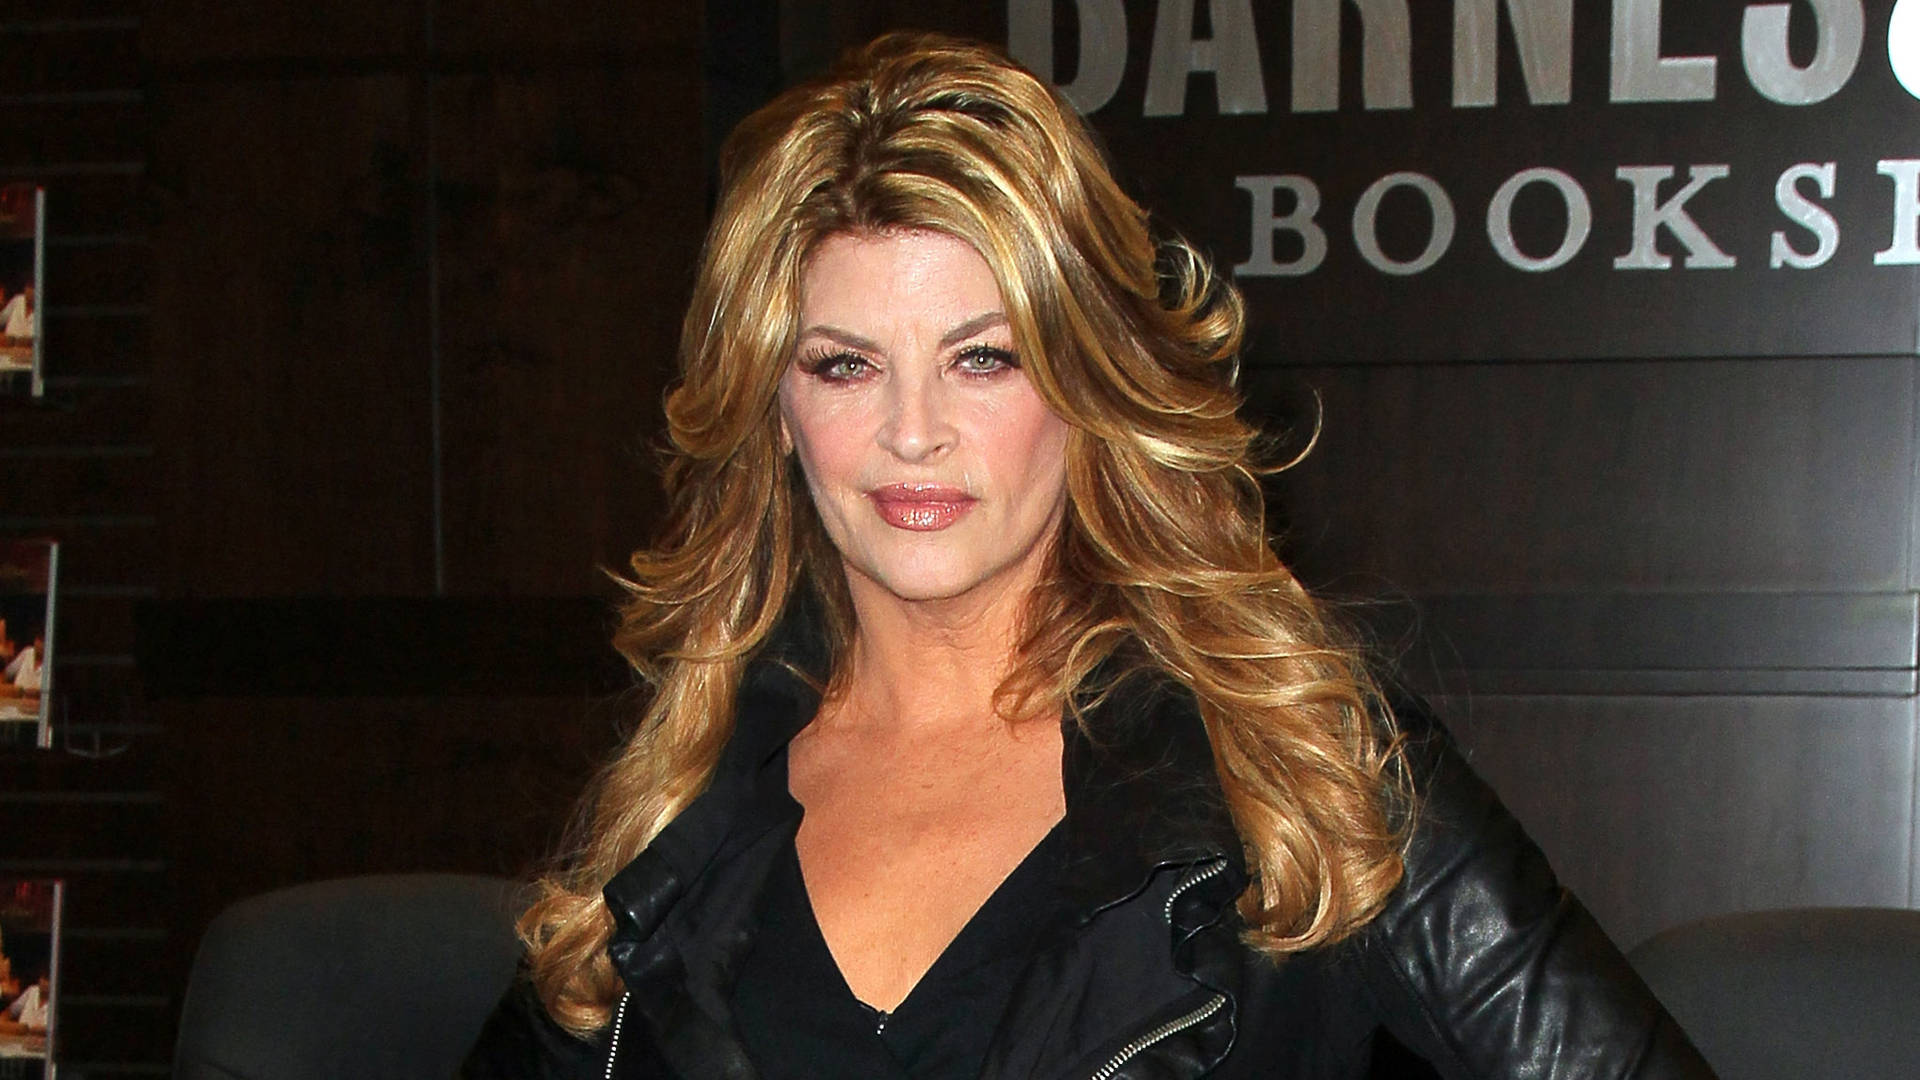 Blonde Kirstie Alley At Book Signing Event Wallpaper